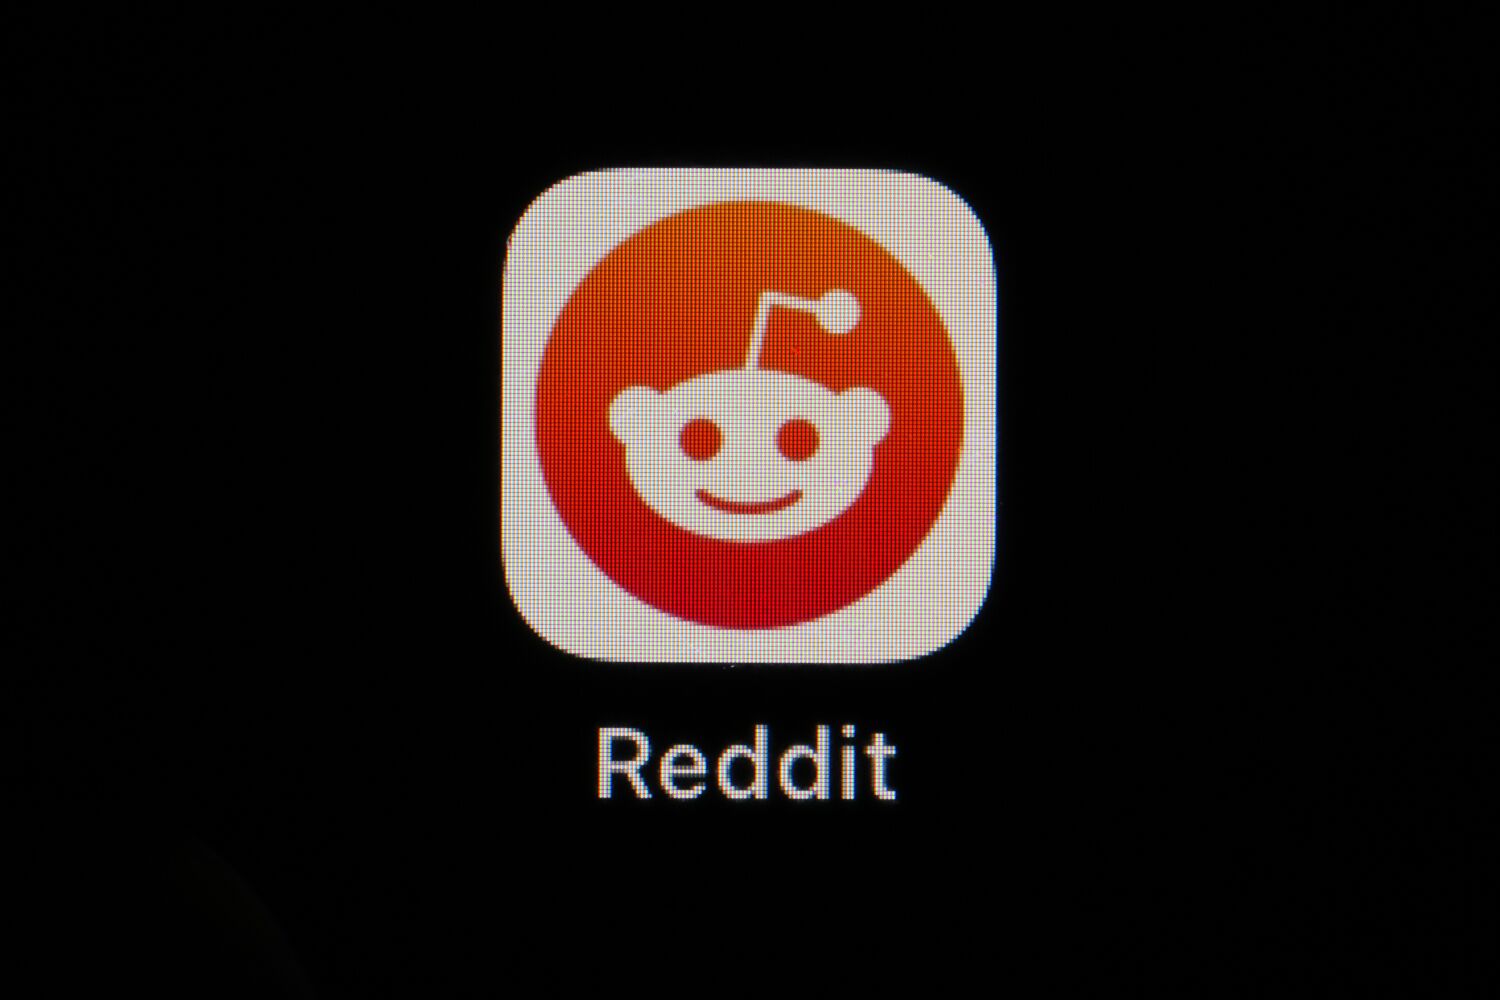 Thousands of Reddit communities go dark to protest new data fees